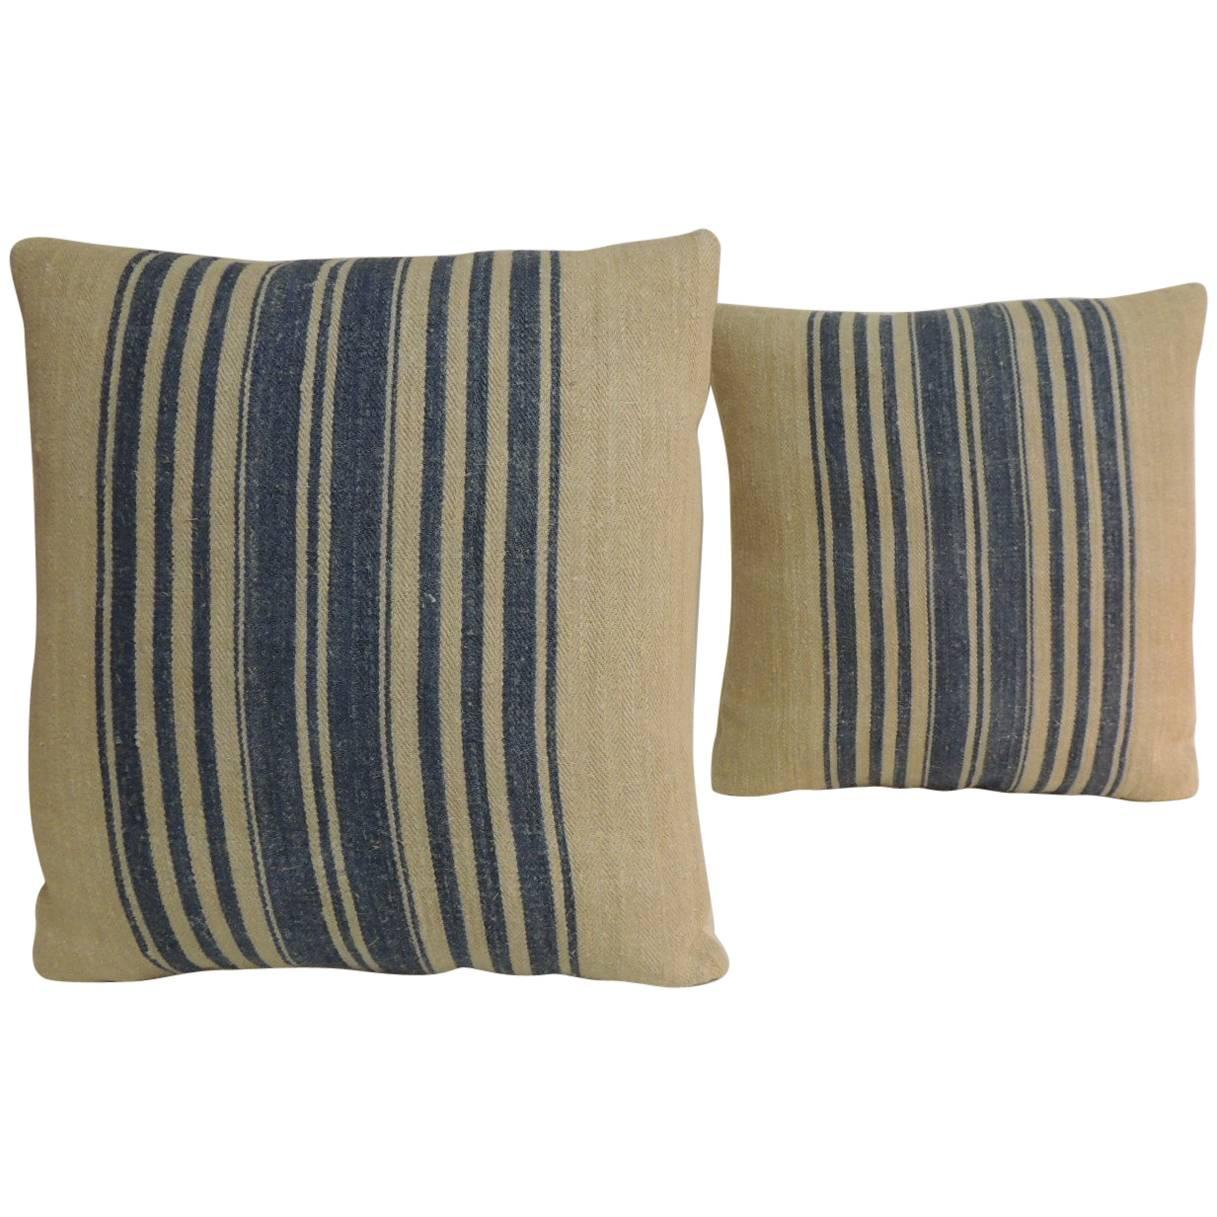 Pair of French Blue and Natural Grain Sack Stripes Decorative Pillows